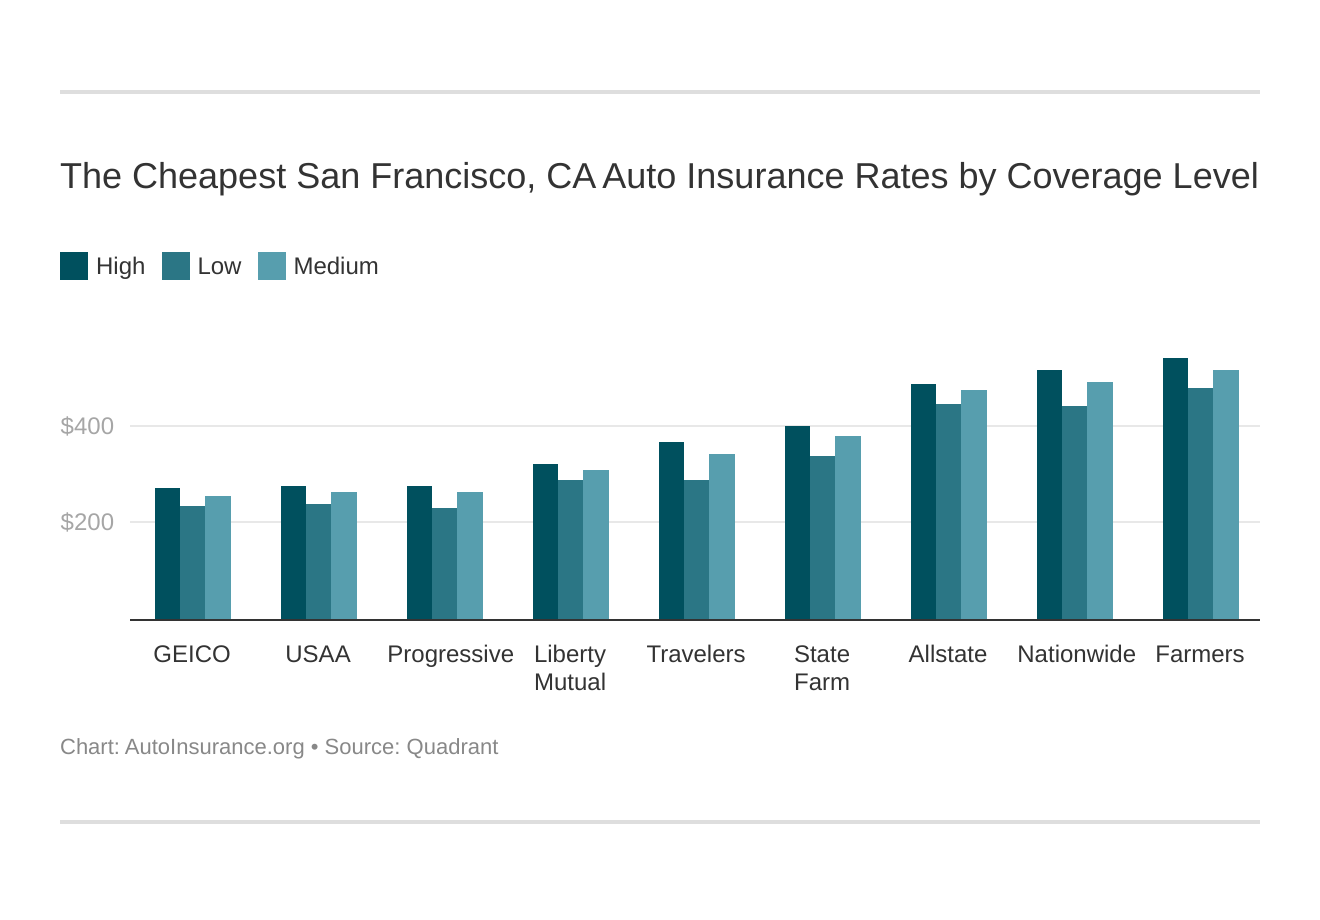 The Cheapest San Francisco, CA Auto Insurance Rates by Coverage Level